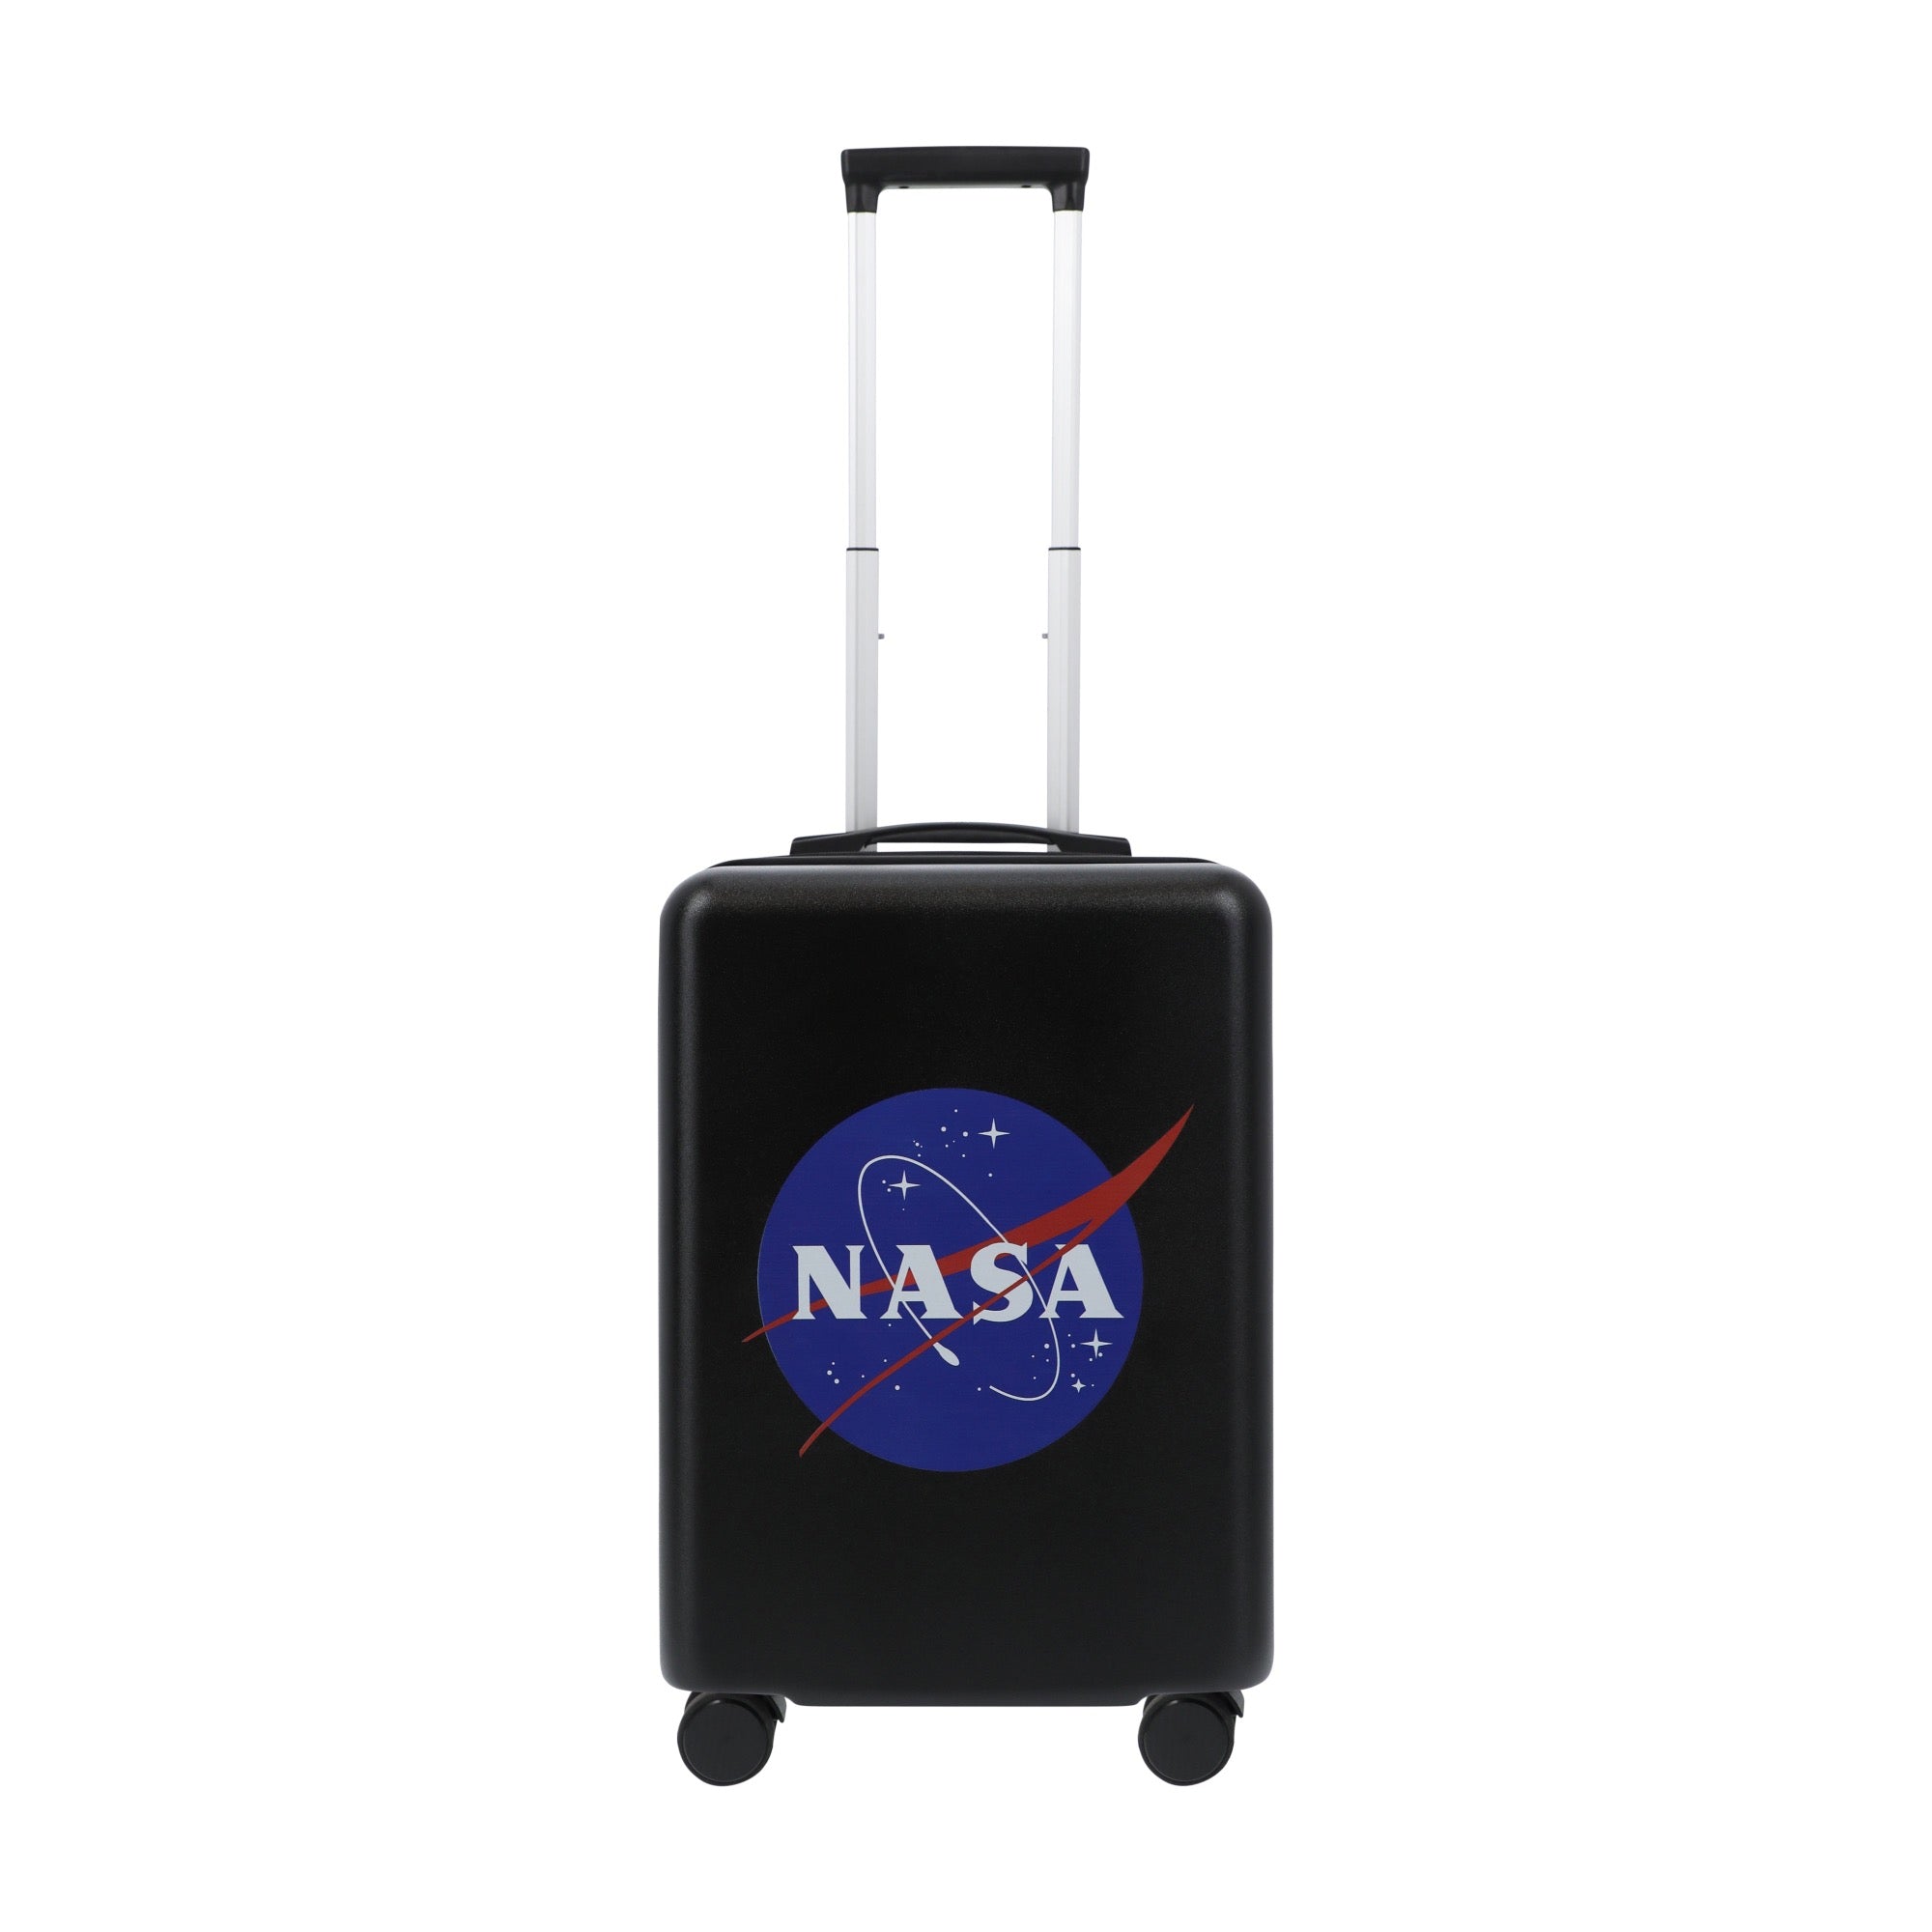 Black nasa 22.5" carry-on spinner suitcase luggage by Ful